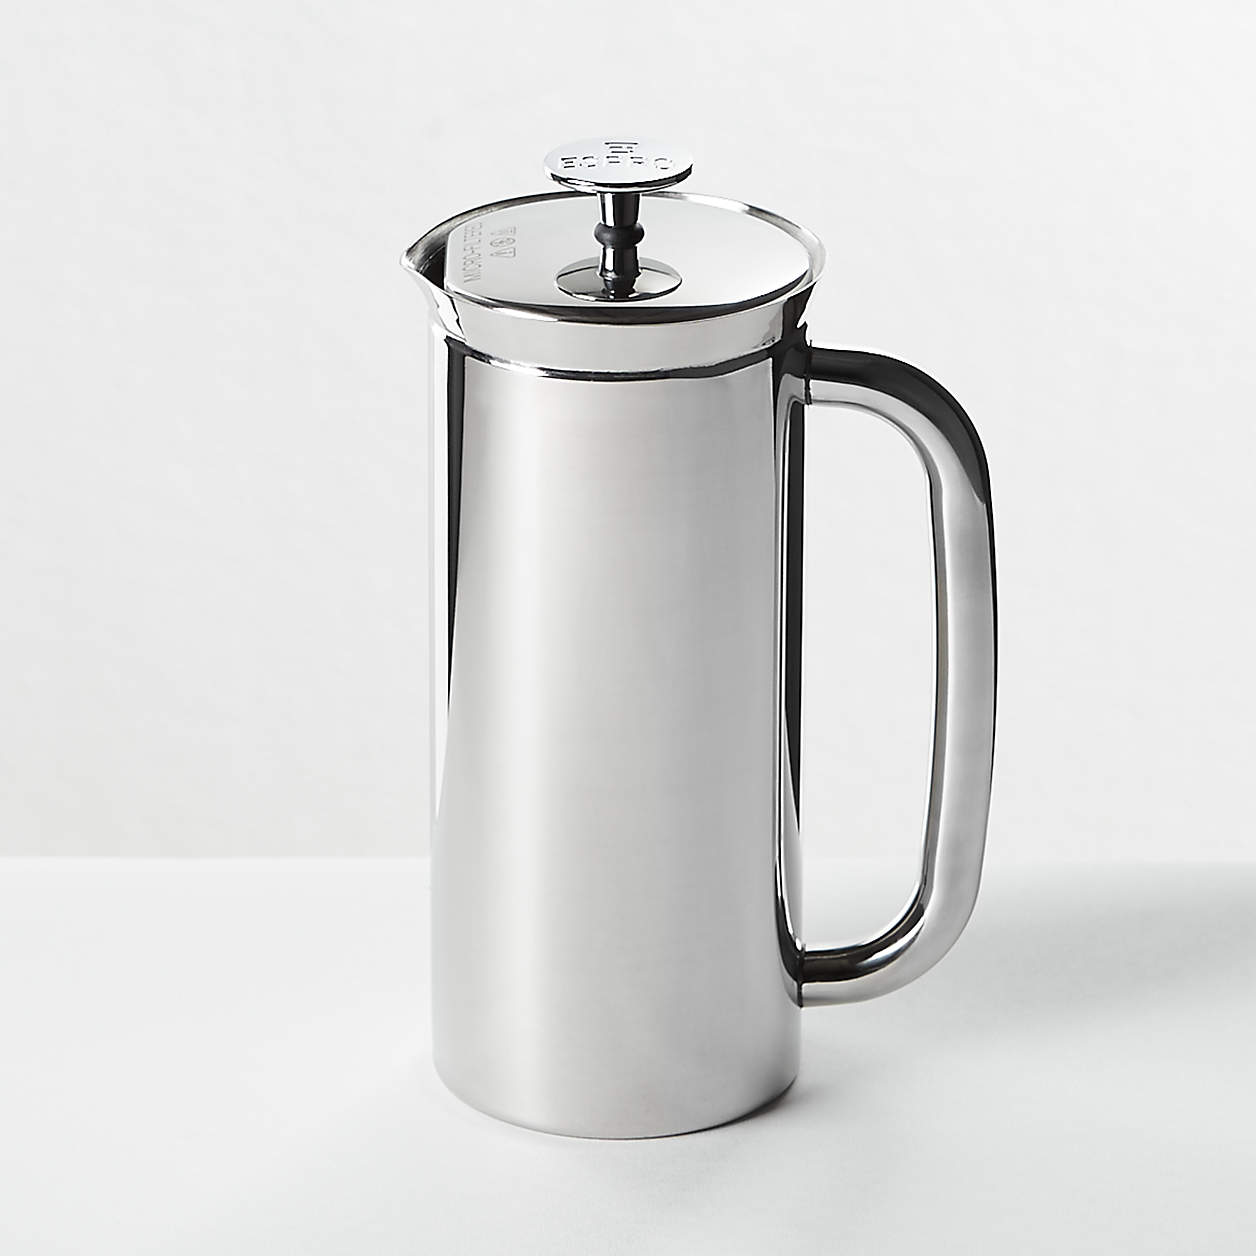 Espro P7 18-Oz. Polished Stainless Steel French Press + Reviews | Crate Espro P7 Stainless Steel French Press